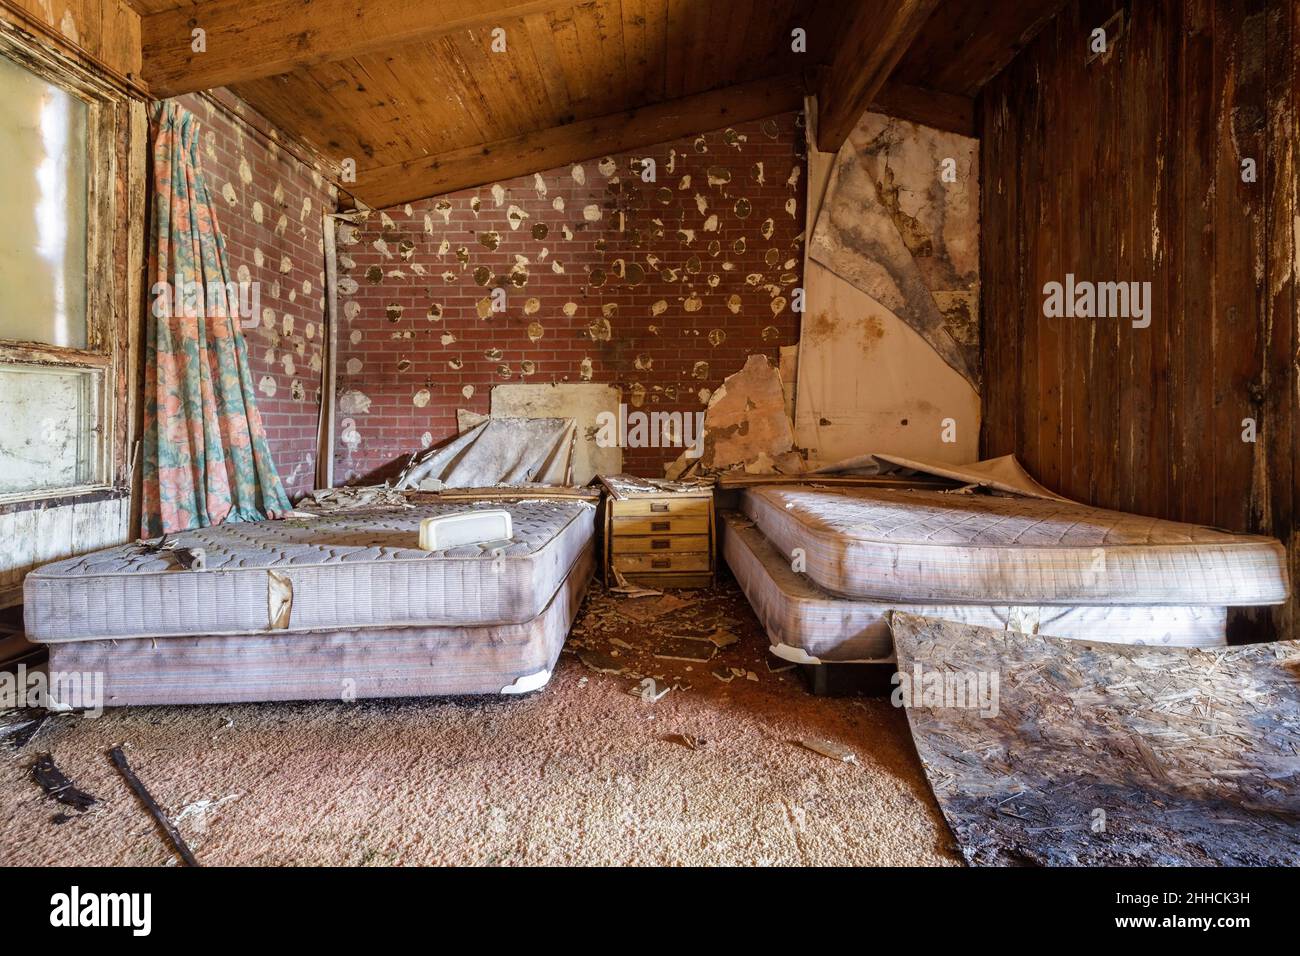 An abandoned motel room with extreme rot starting to take hold. Stock Photo